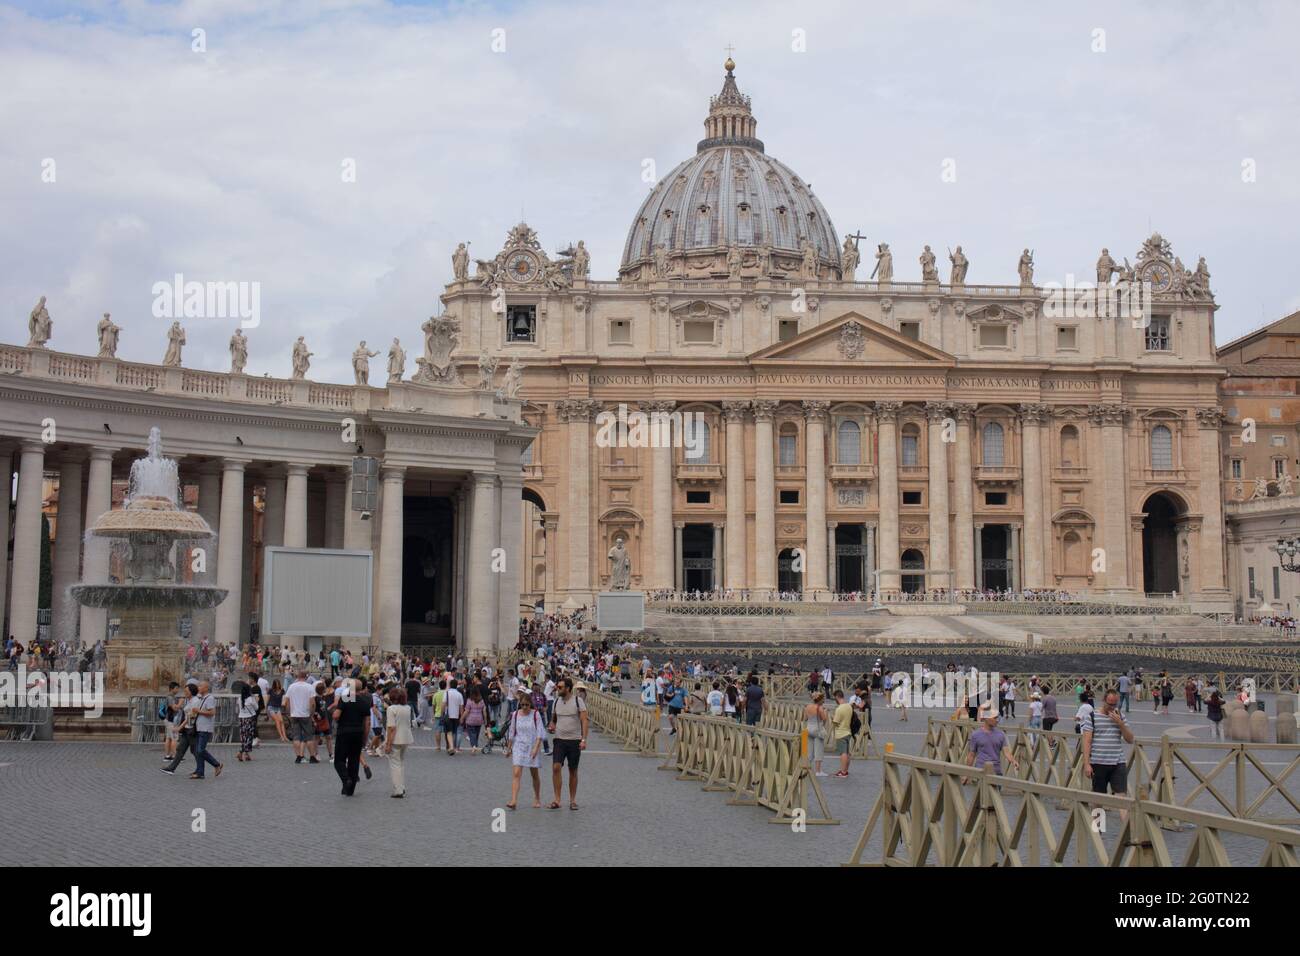 People on St. Peter's square in Vatican against St. Peter basilica, the most renowned work of Renaissance architecture and largest church in the world Stock Photo